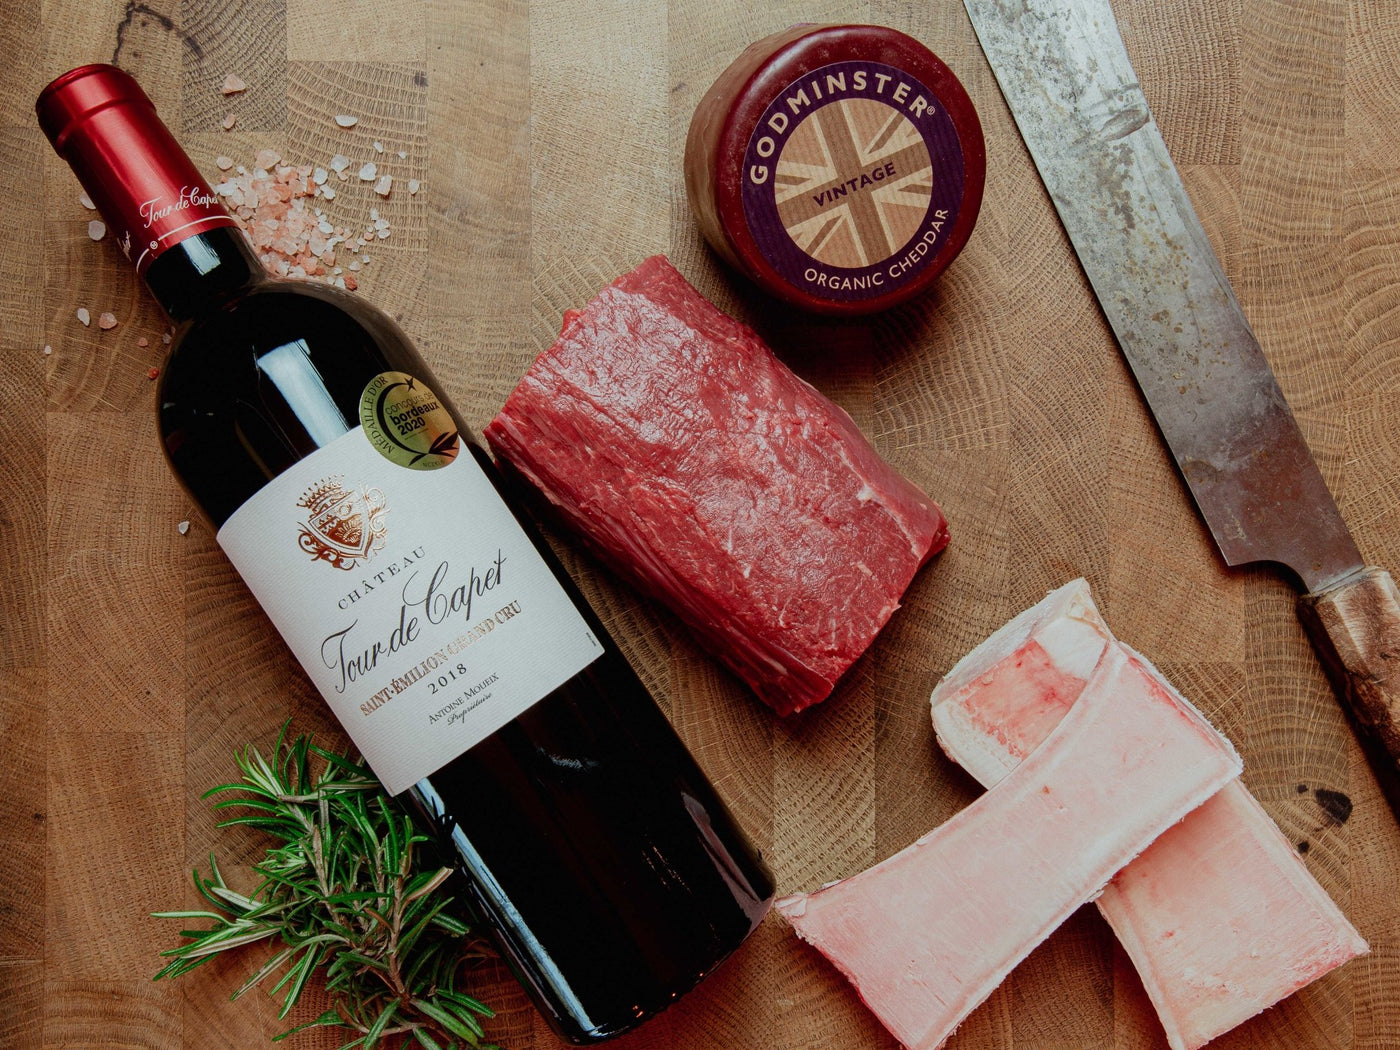 Centre Cut Fillet Valentine's Day Box - Thomas Joseph Butchery - Ethical Dry-Aged Meat The Best Steak UK Thomas Joseph Butchery